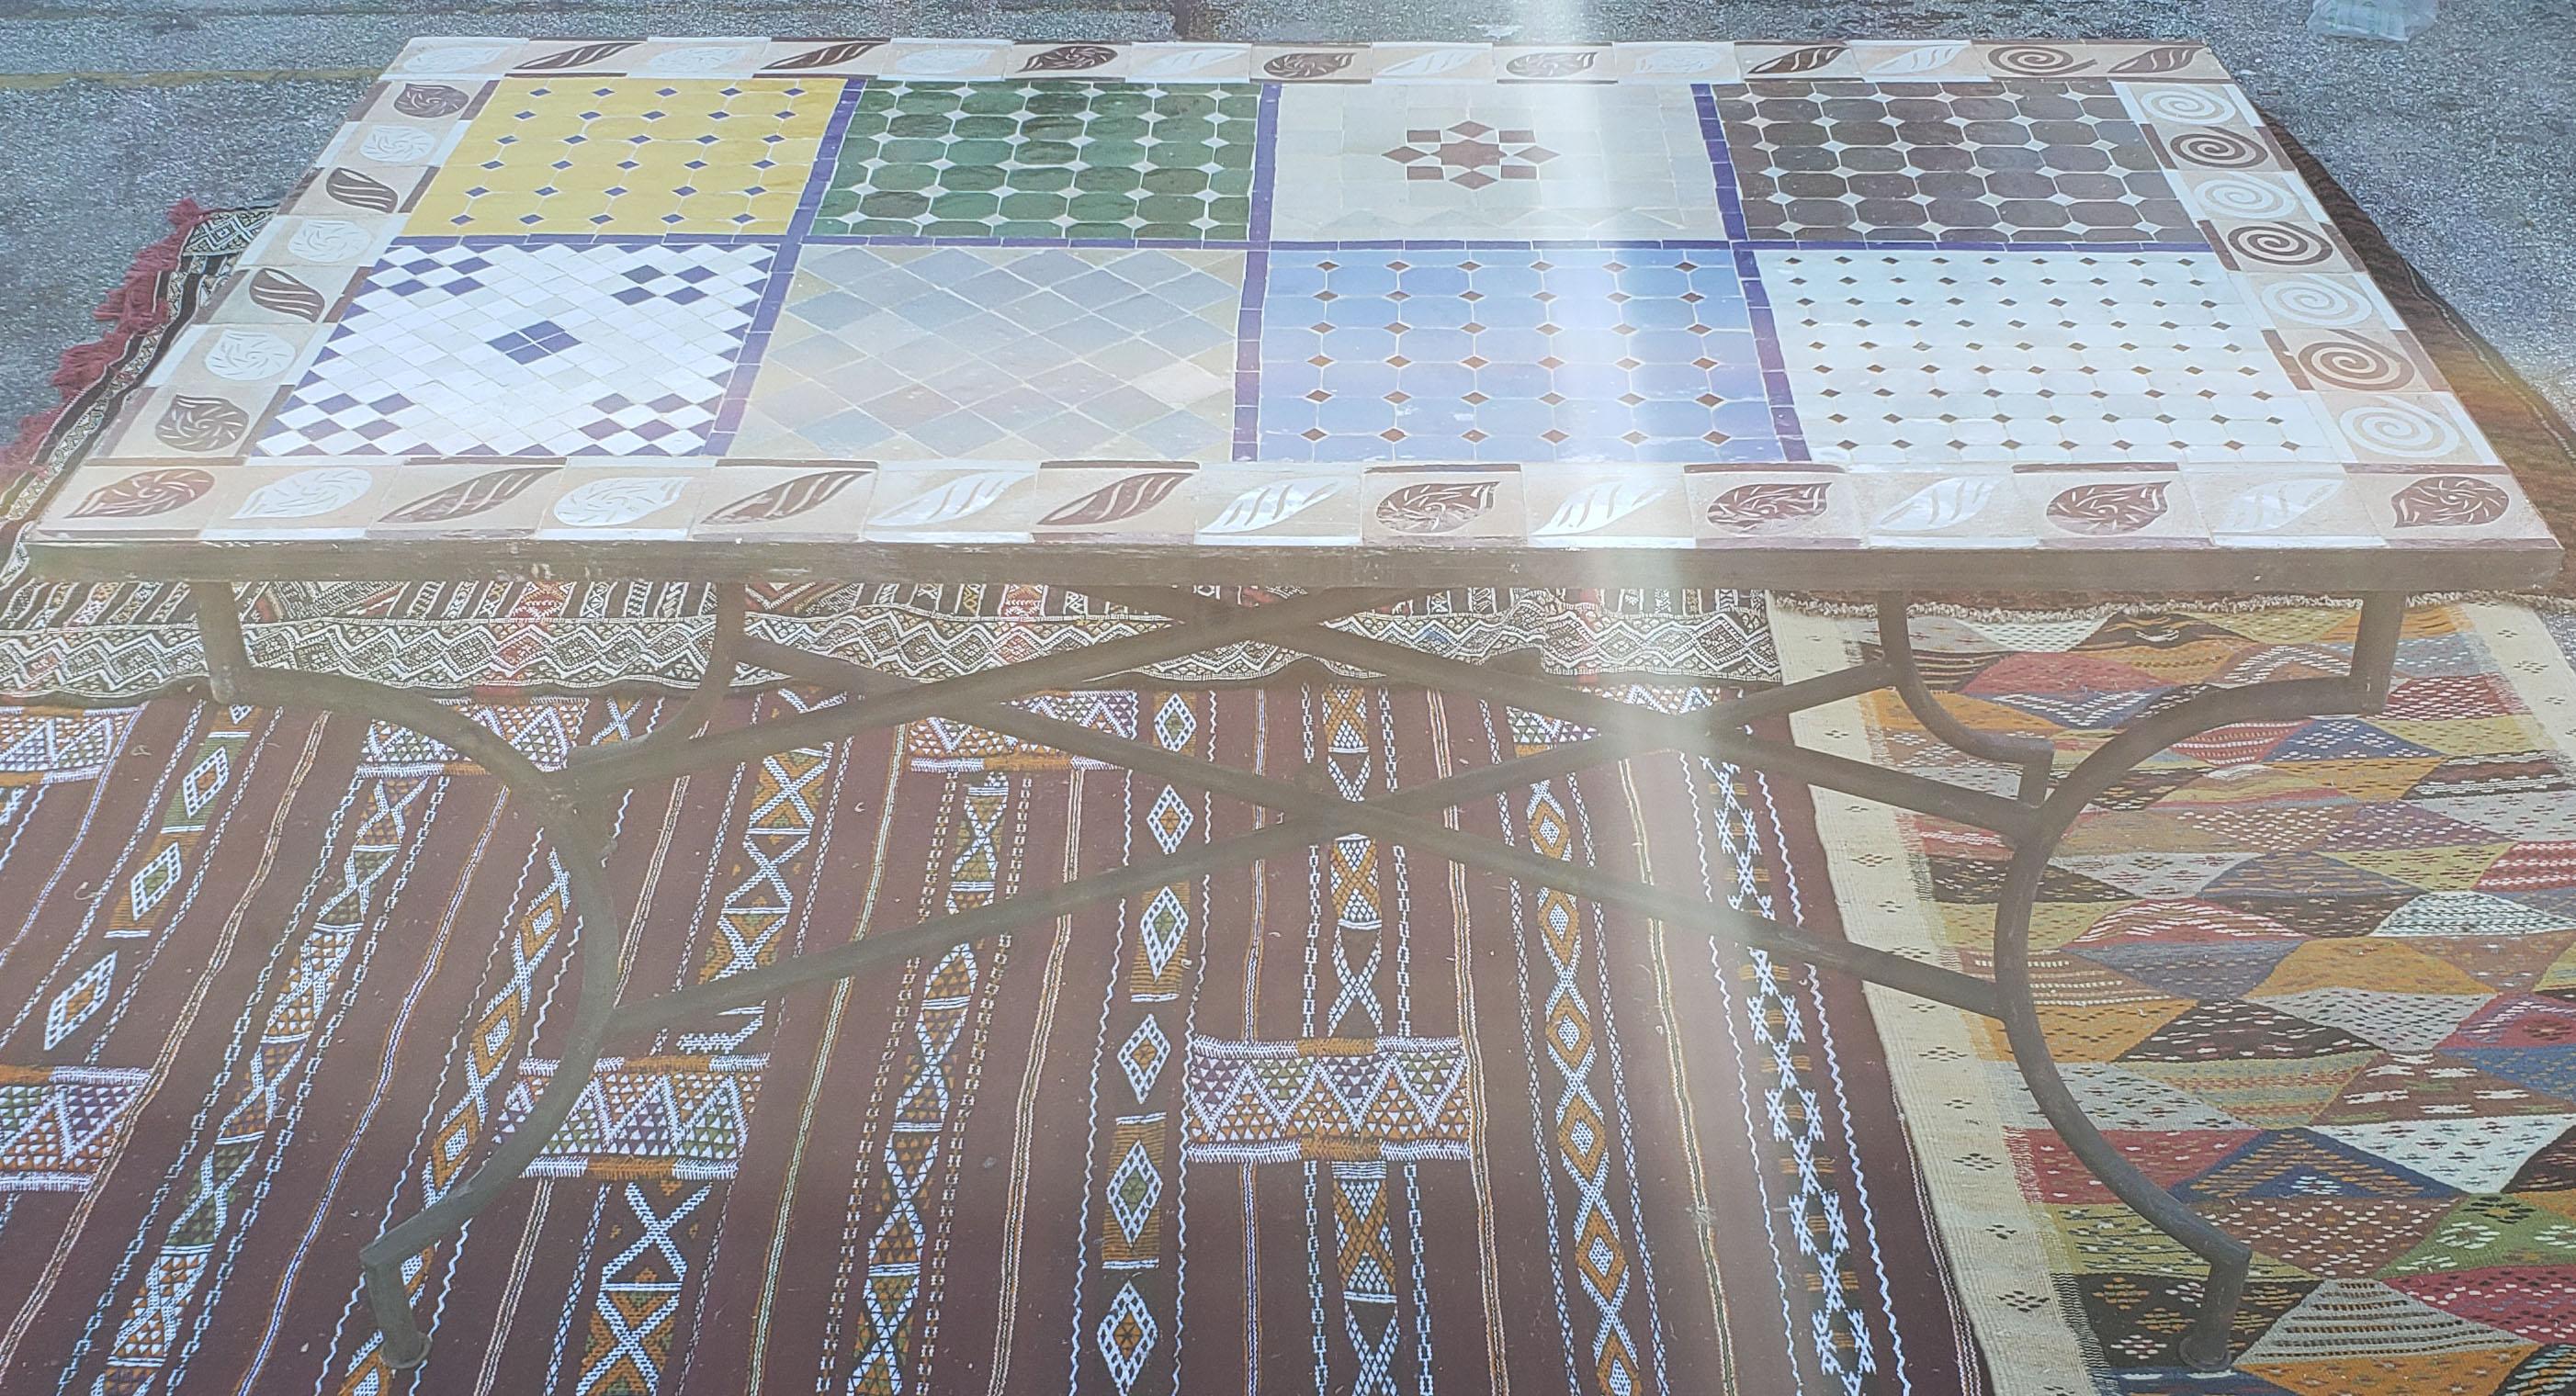 A new arrival. 100 % glazed square. Sampler pattern.
Multi-color Sampler Moroccan mosaic dining room table (for up to 6 people) measuring approximately 32